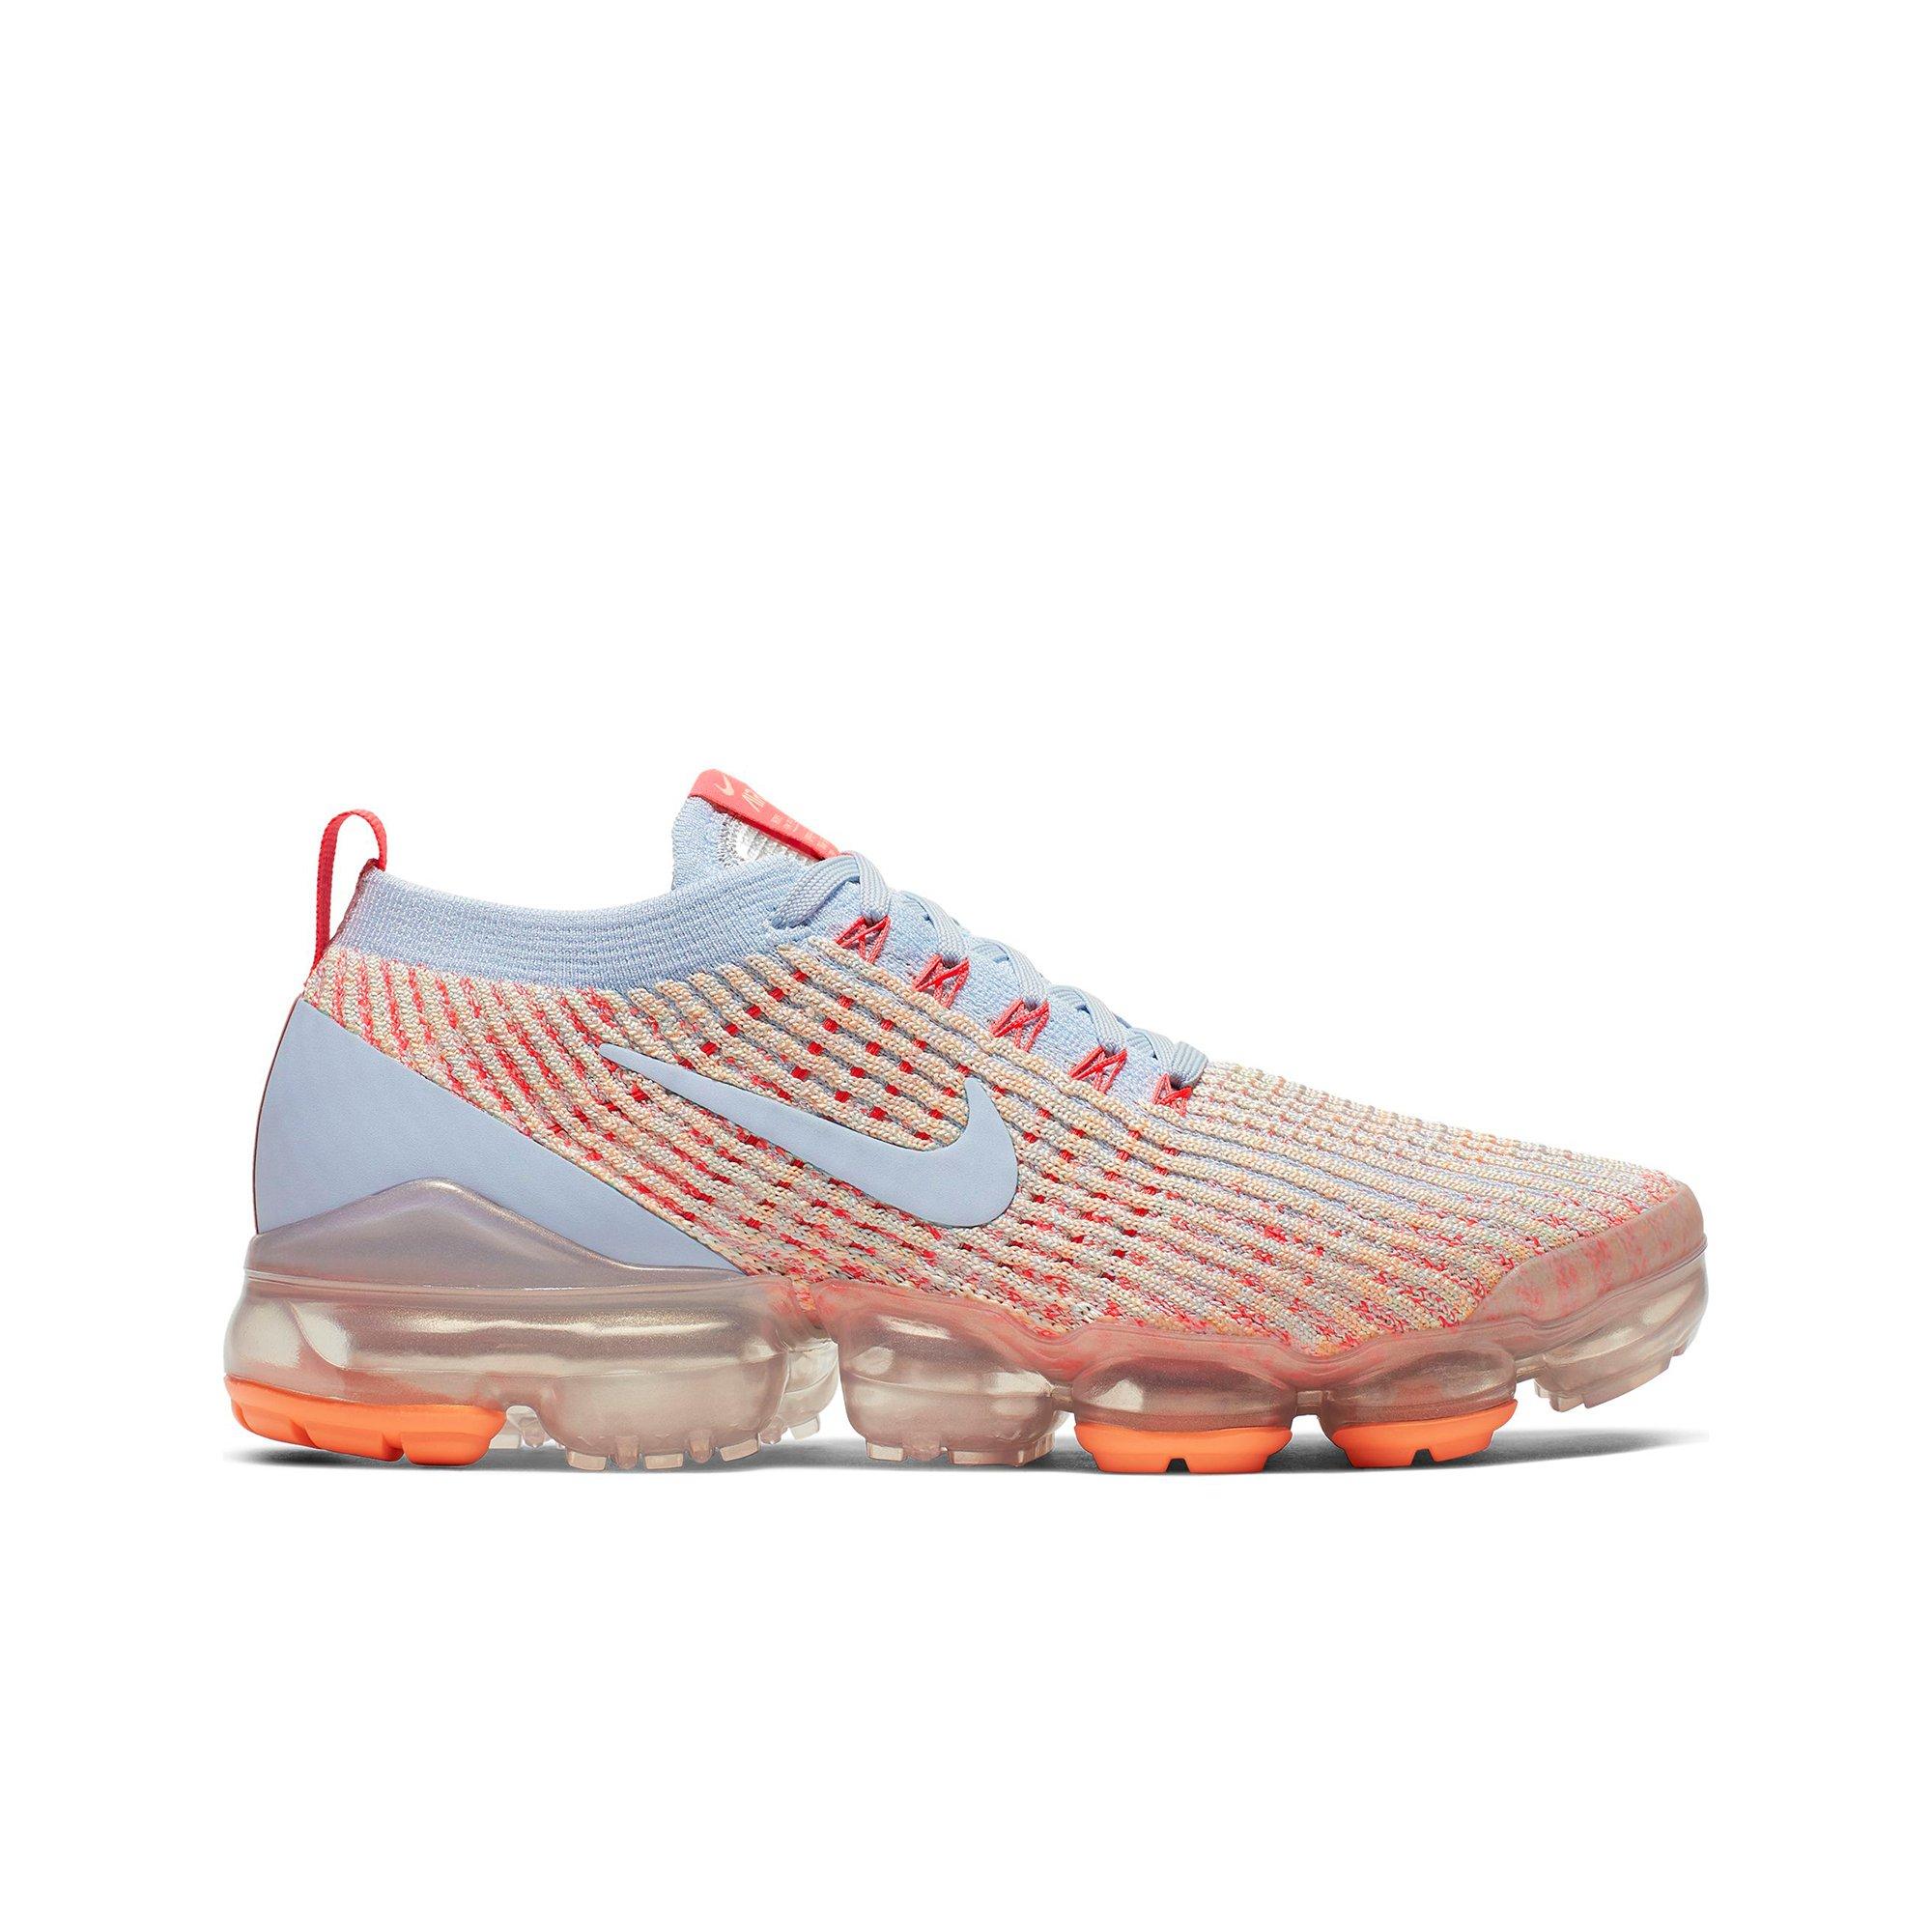 blue and orange vapormax flyknit